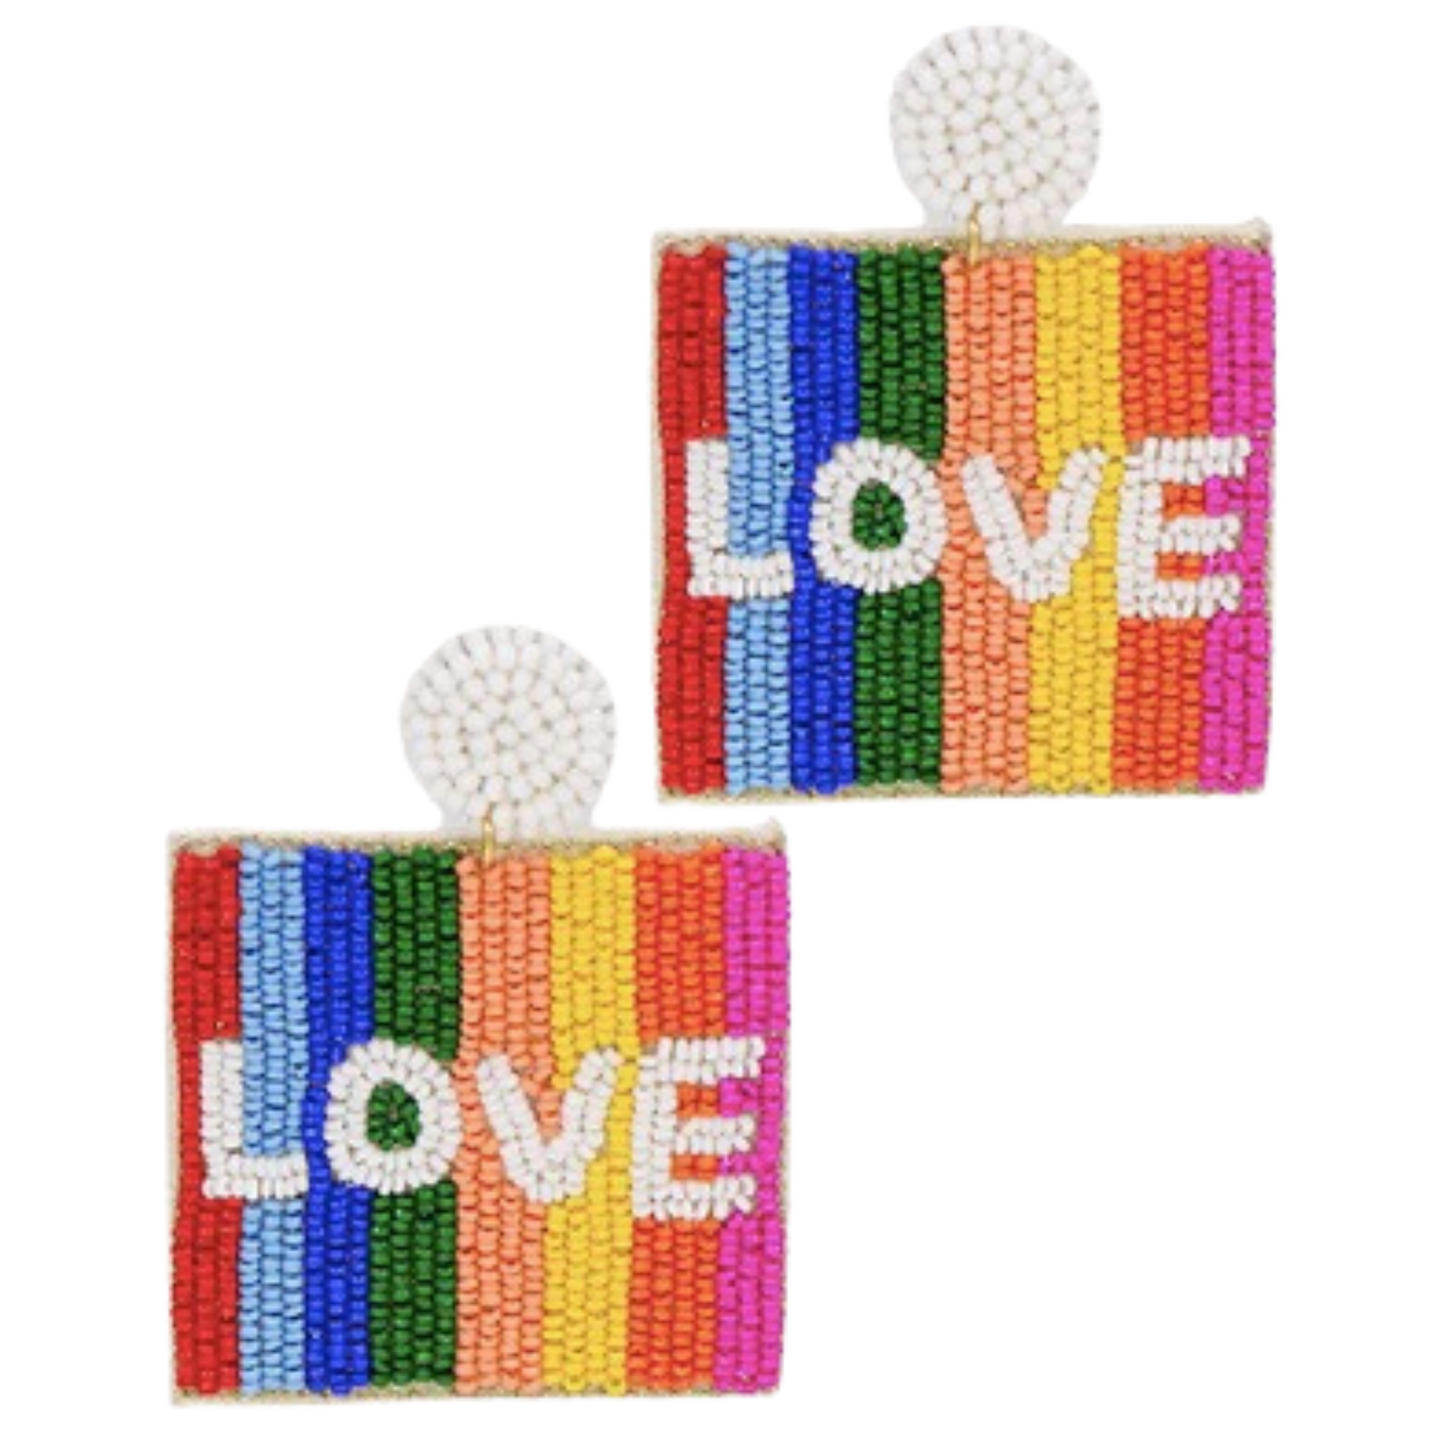 These dainty Square Love Earrings are the perfect addition to any outfit. The multicolor beads add a pop of fun to the classic square dangle design. Expertly beaded, these earrings are sure to elevate your style.